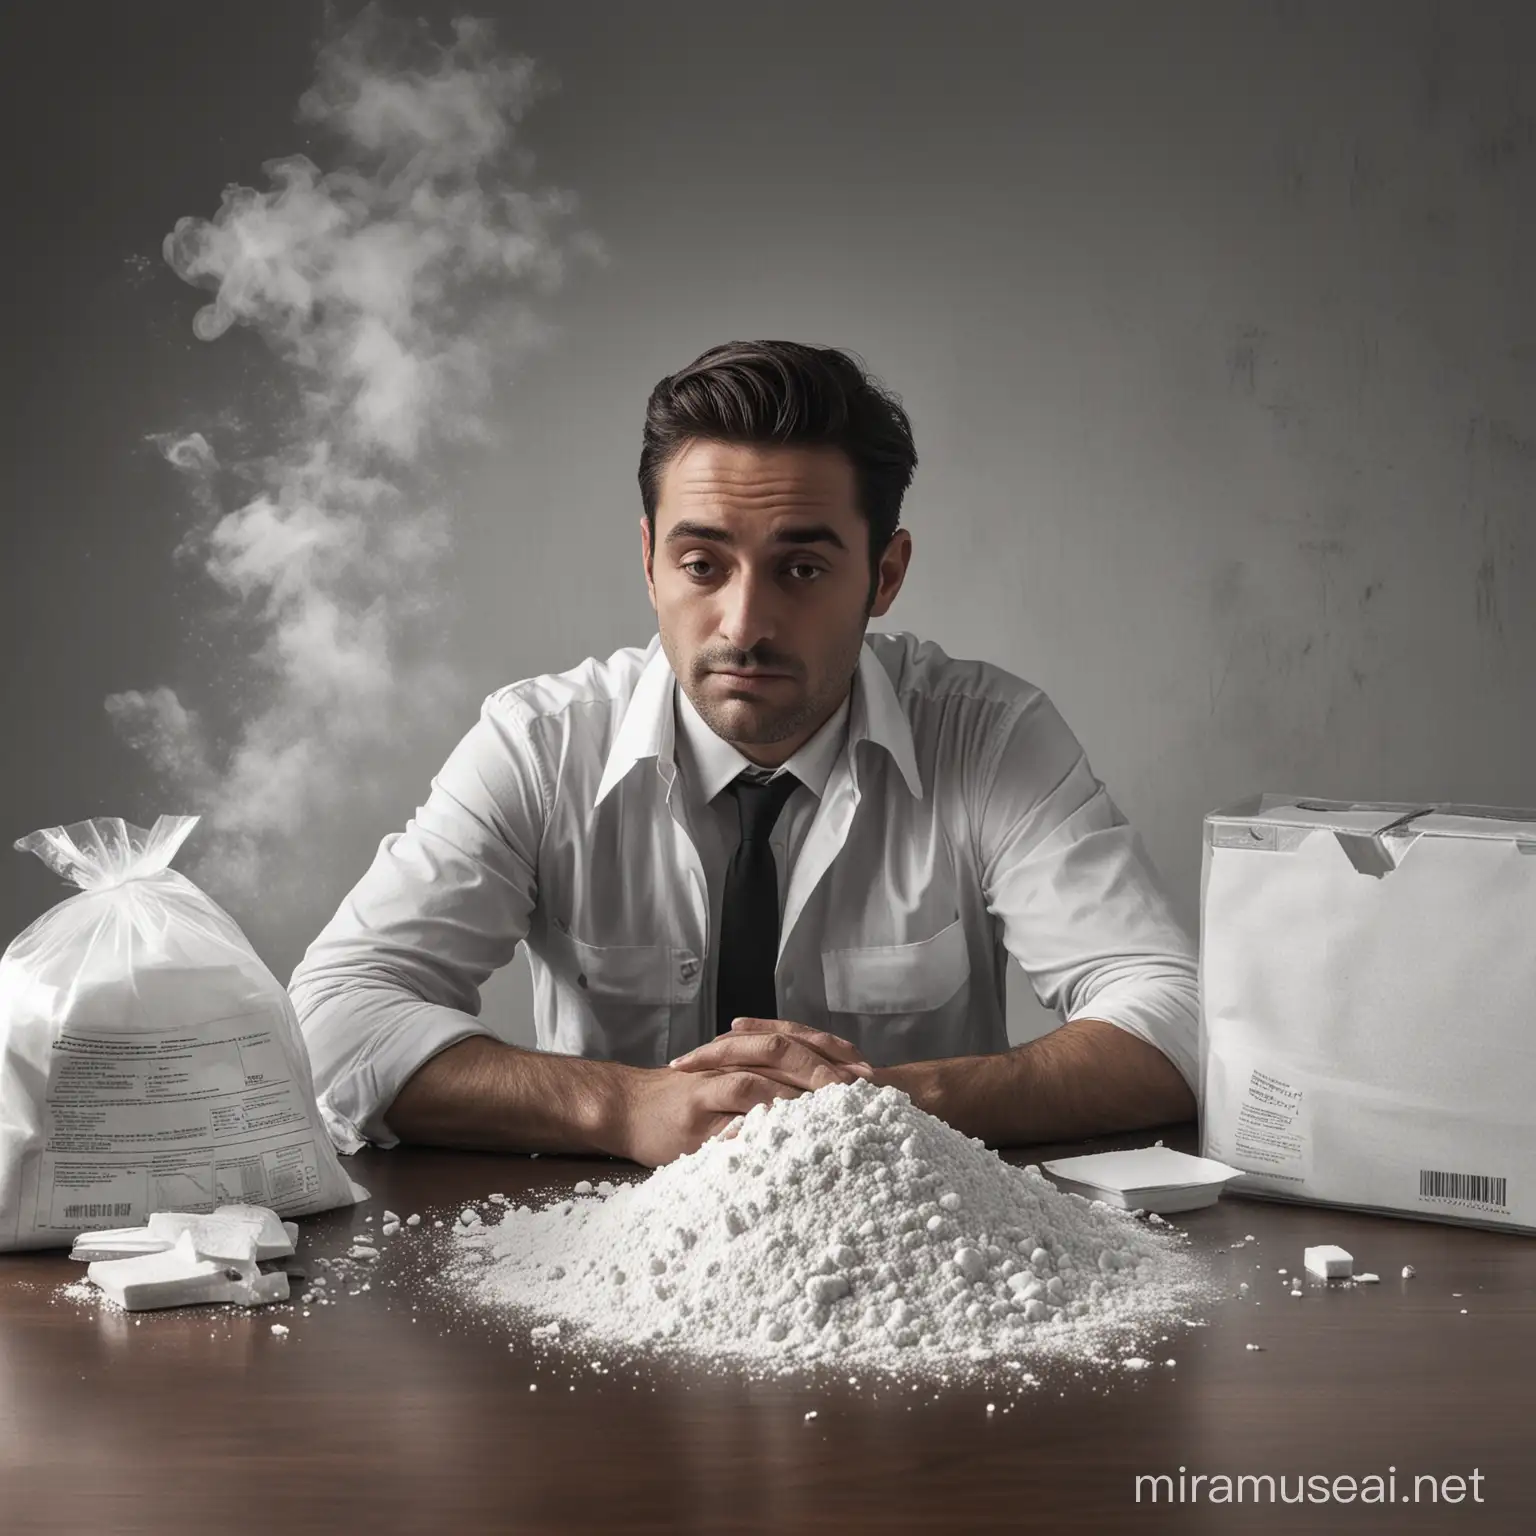 A man sitting behind a desk with a pile of cocaine powder in front of him